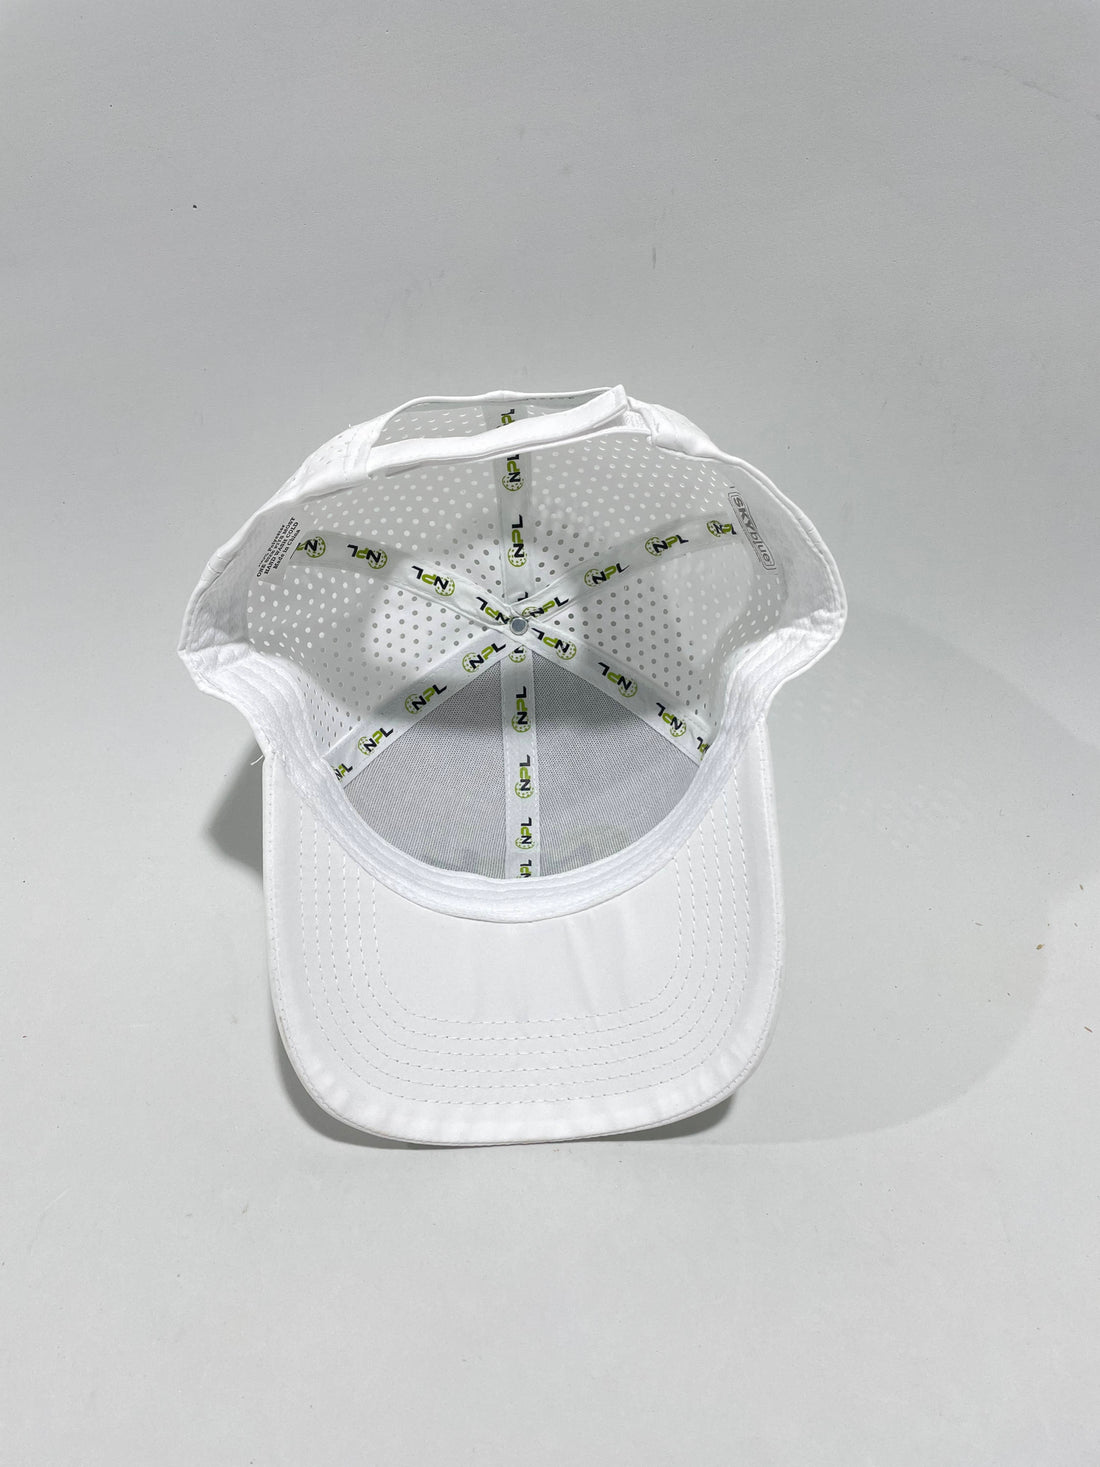 Indy Drivers Premium Performance Hat - New - Reinforced Front Panels - Embroidered Logo - White